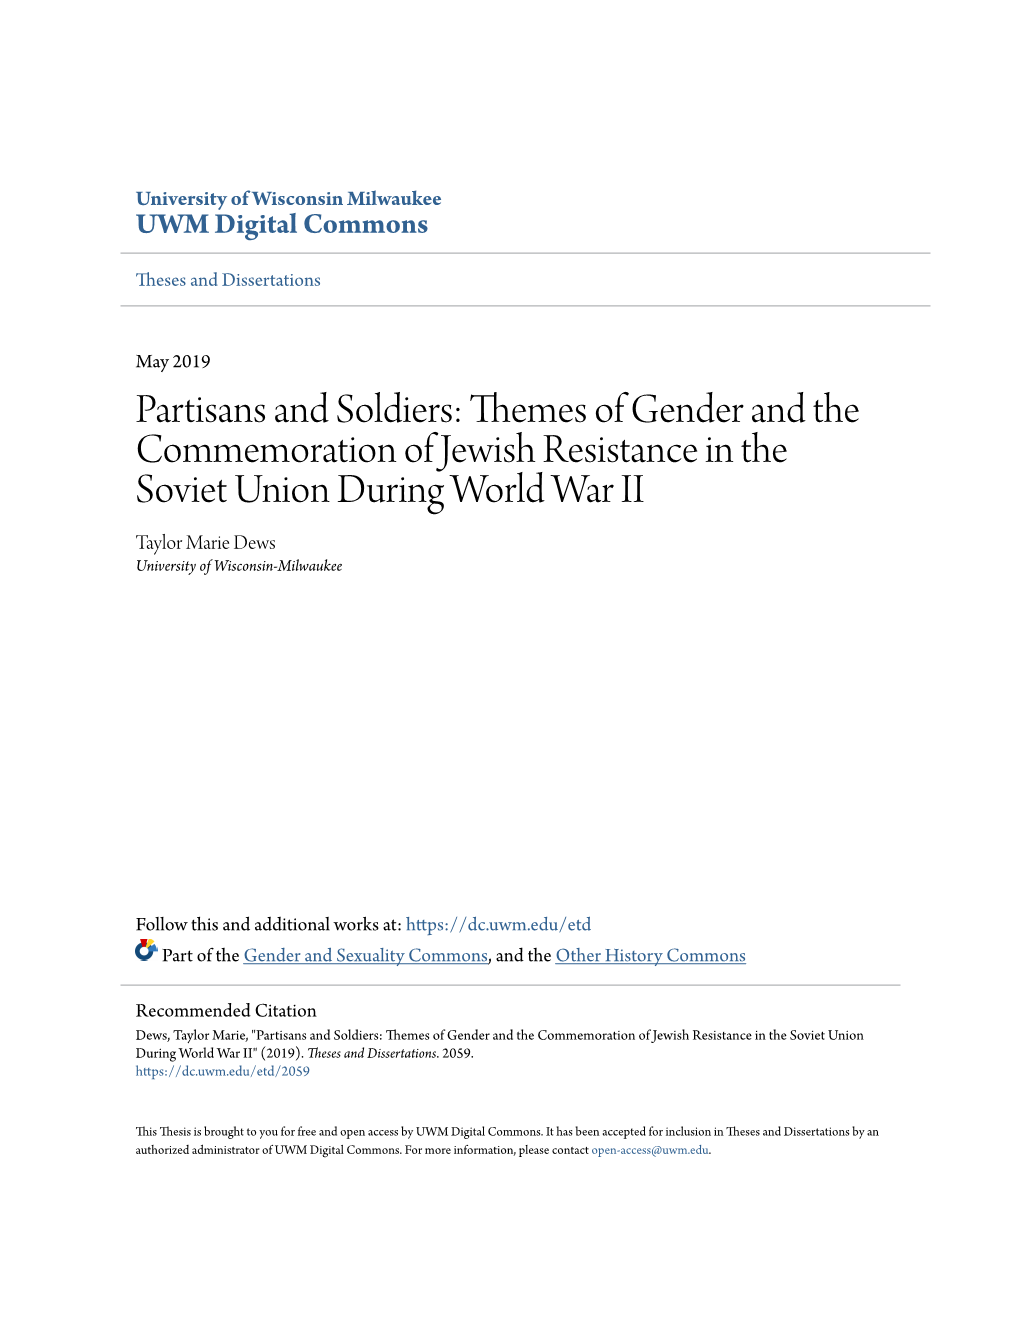 Partisans and Soldiers: Themes of Gender and the Commemoration Of